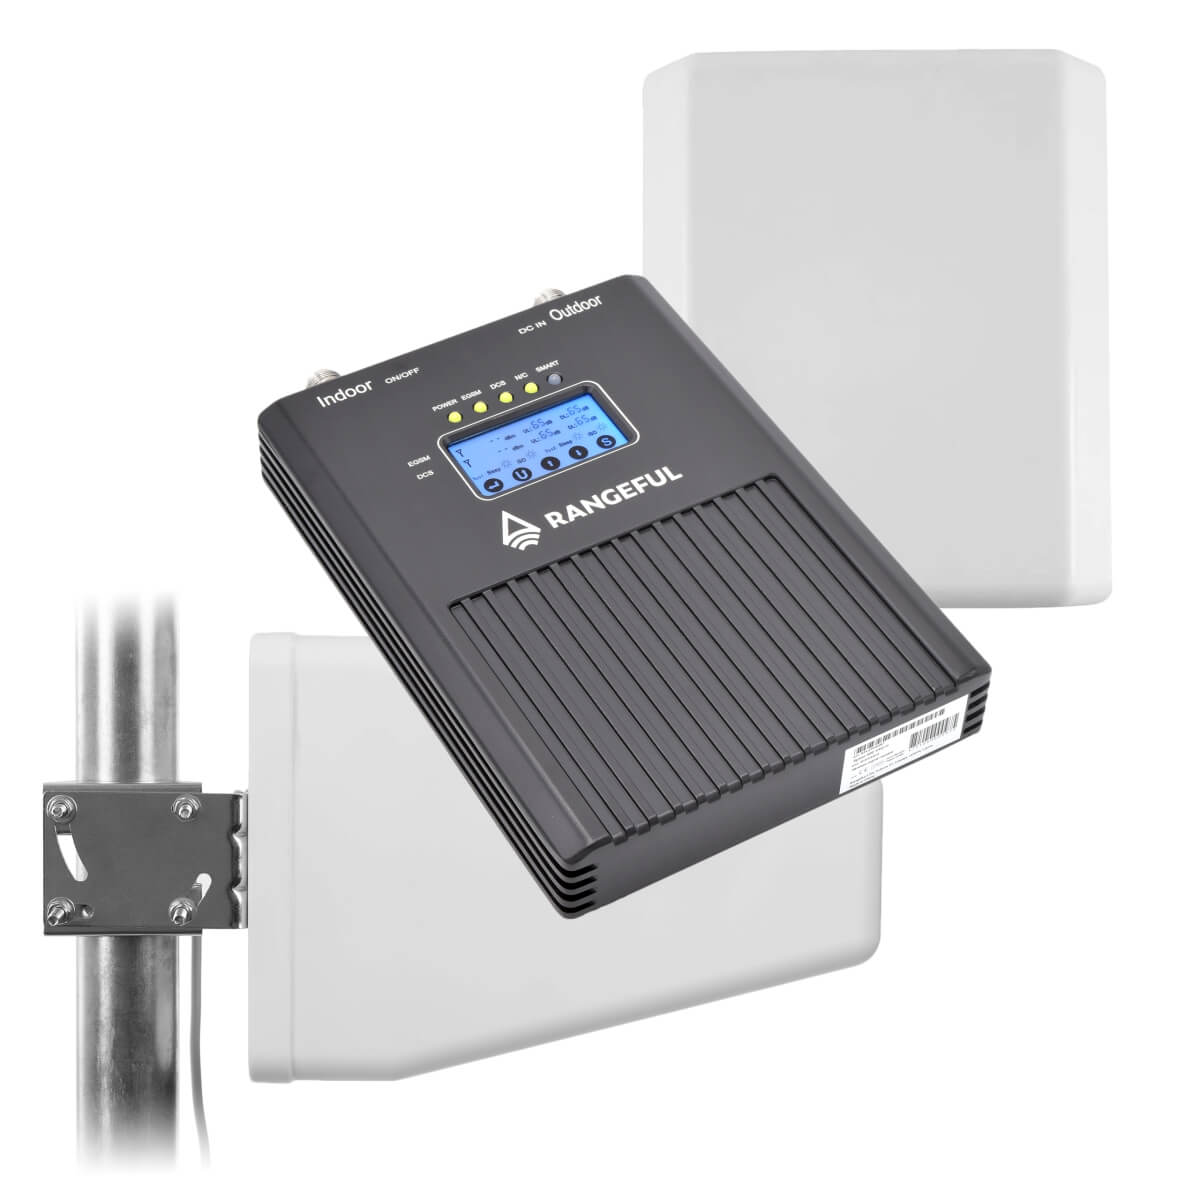 Spear 1000 PRO 5-Band Mobiler Booster